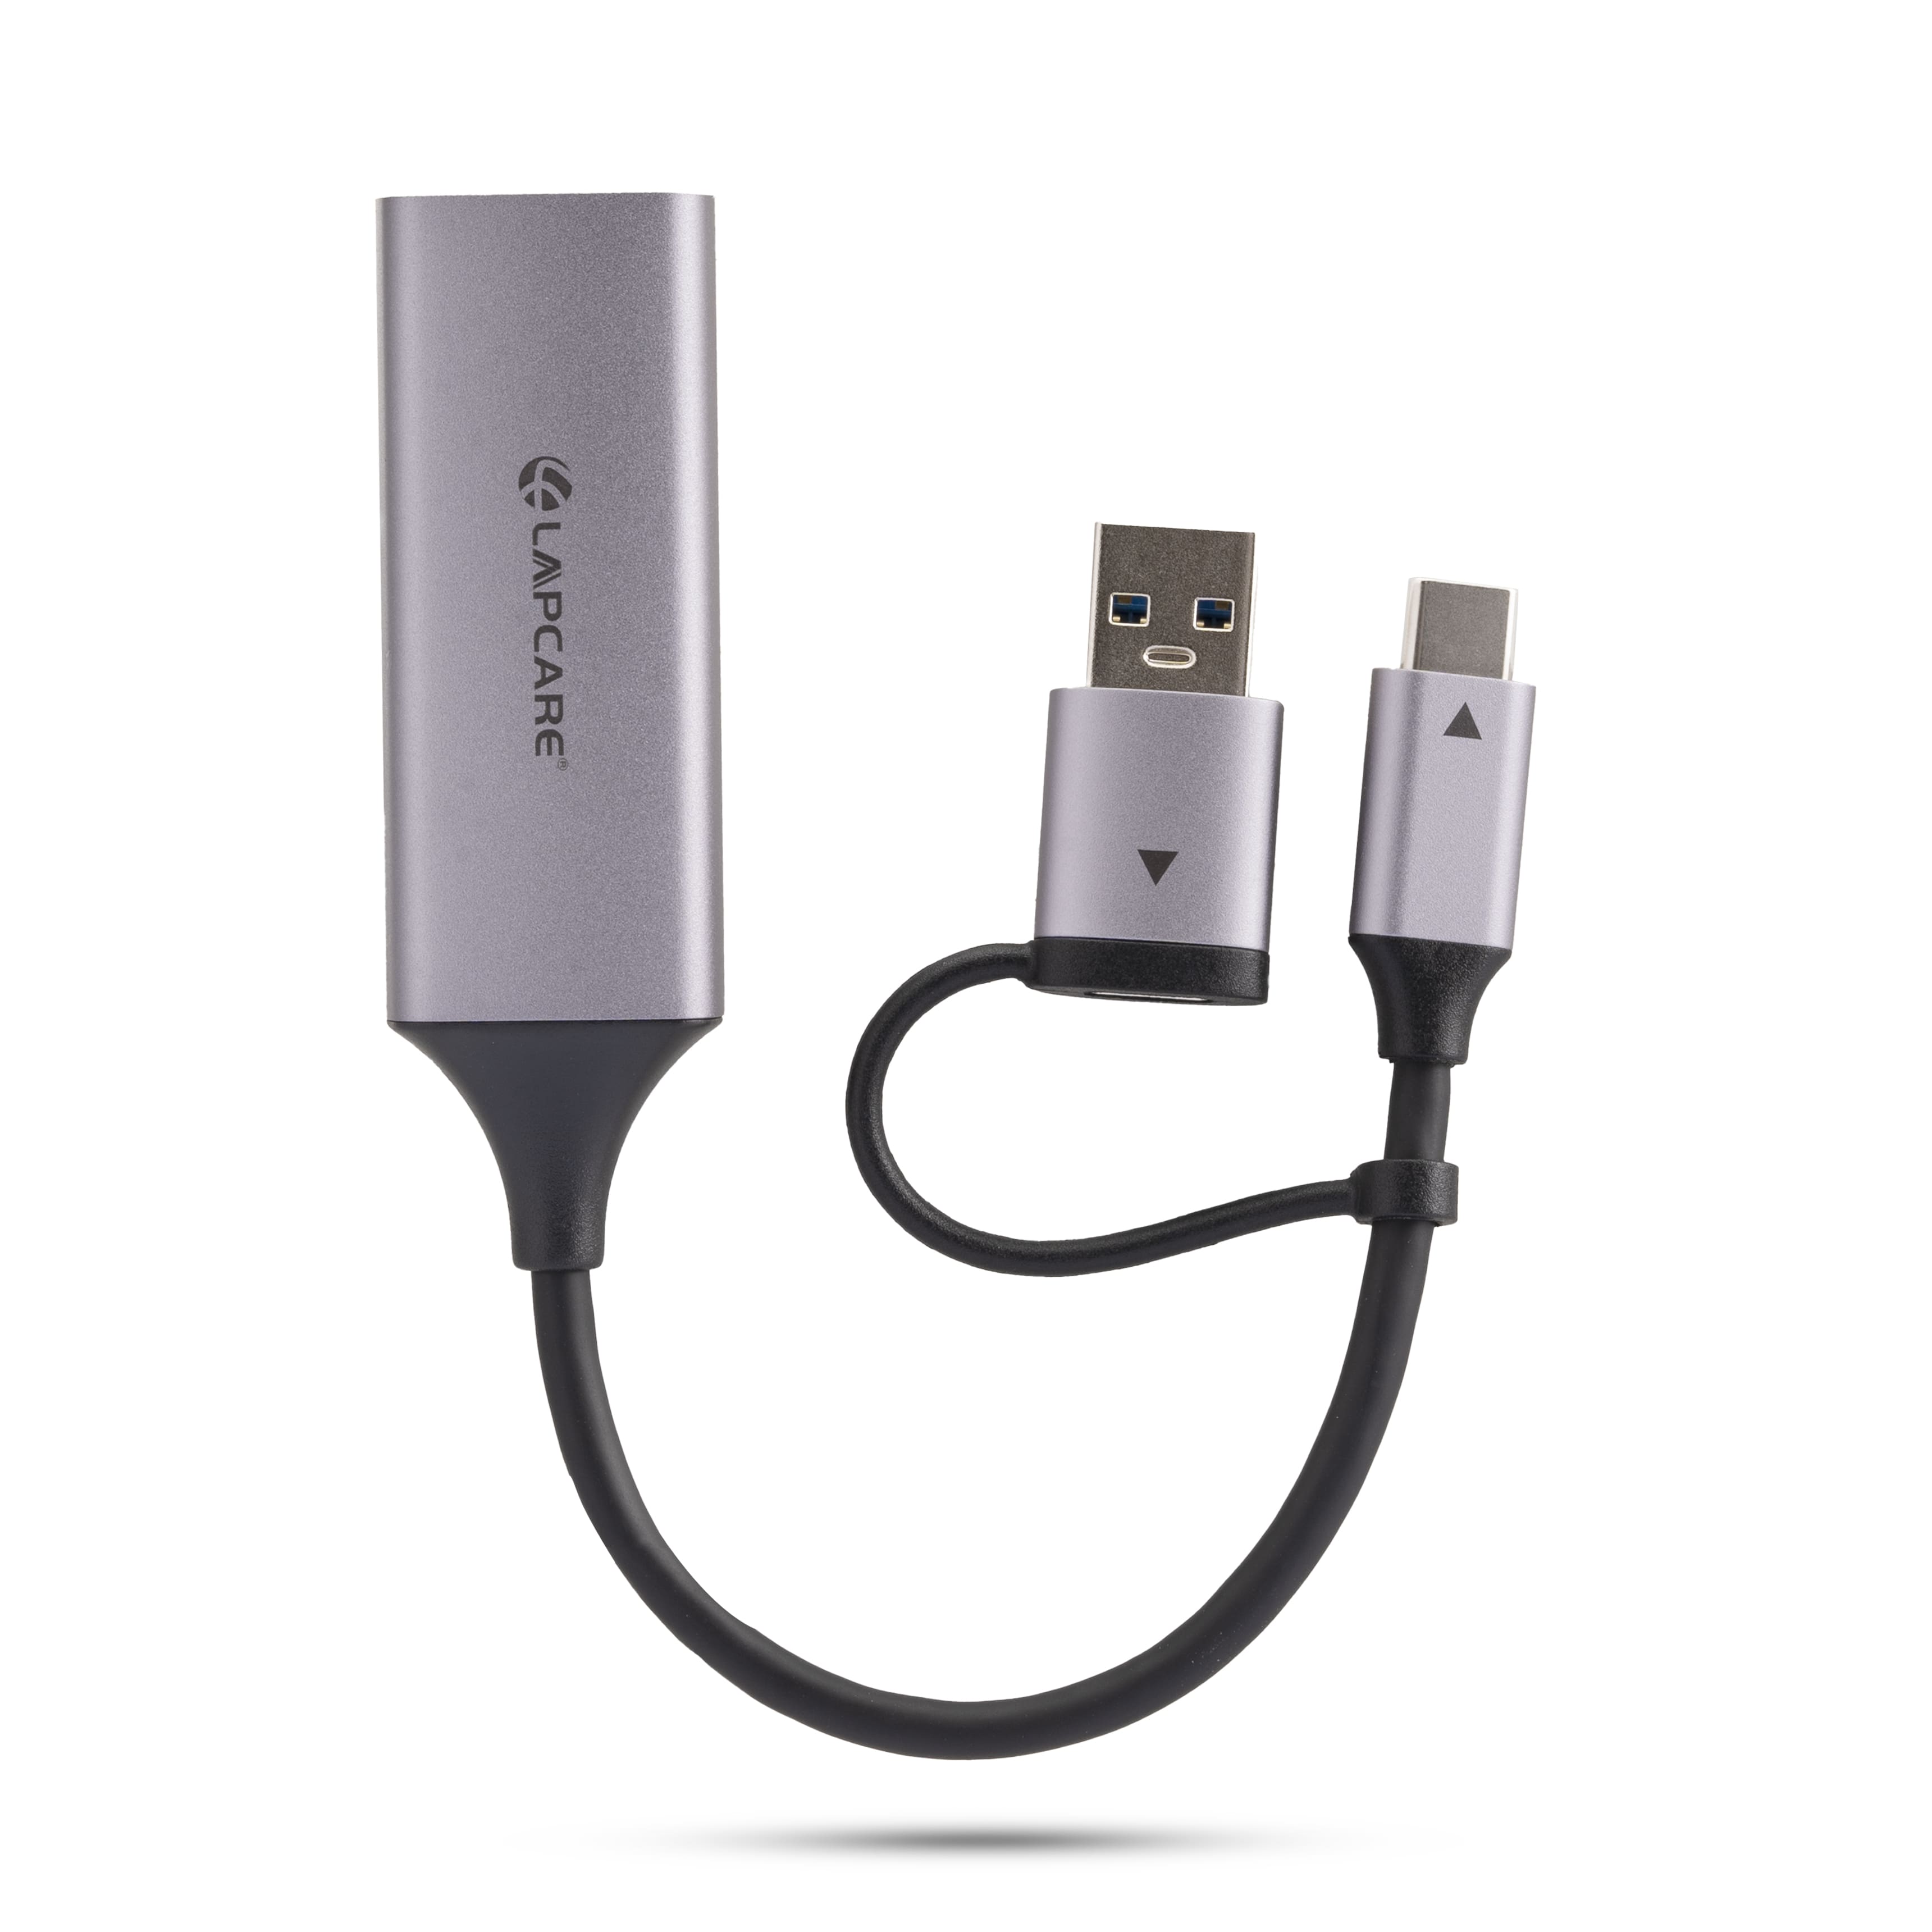 Lapcare 2 in 1 Type C and USB 3.0 Gigabit Ethernet Adapter(LC-123)